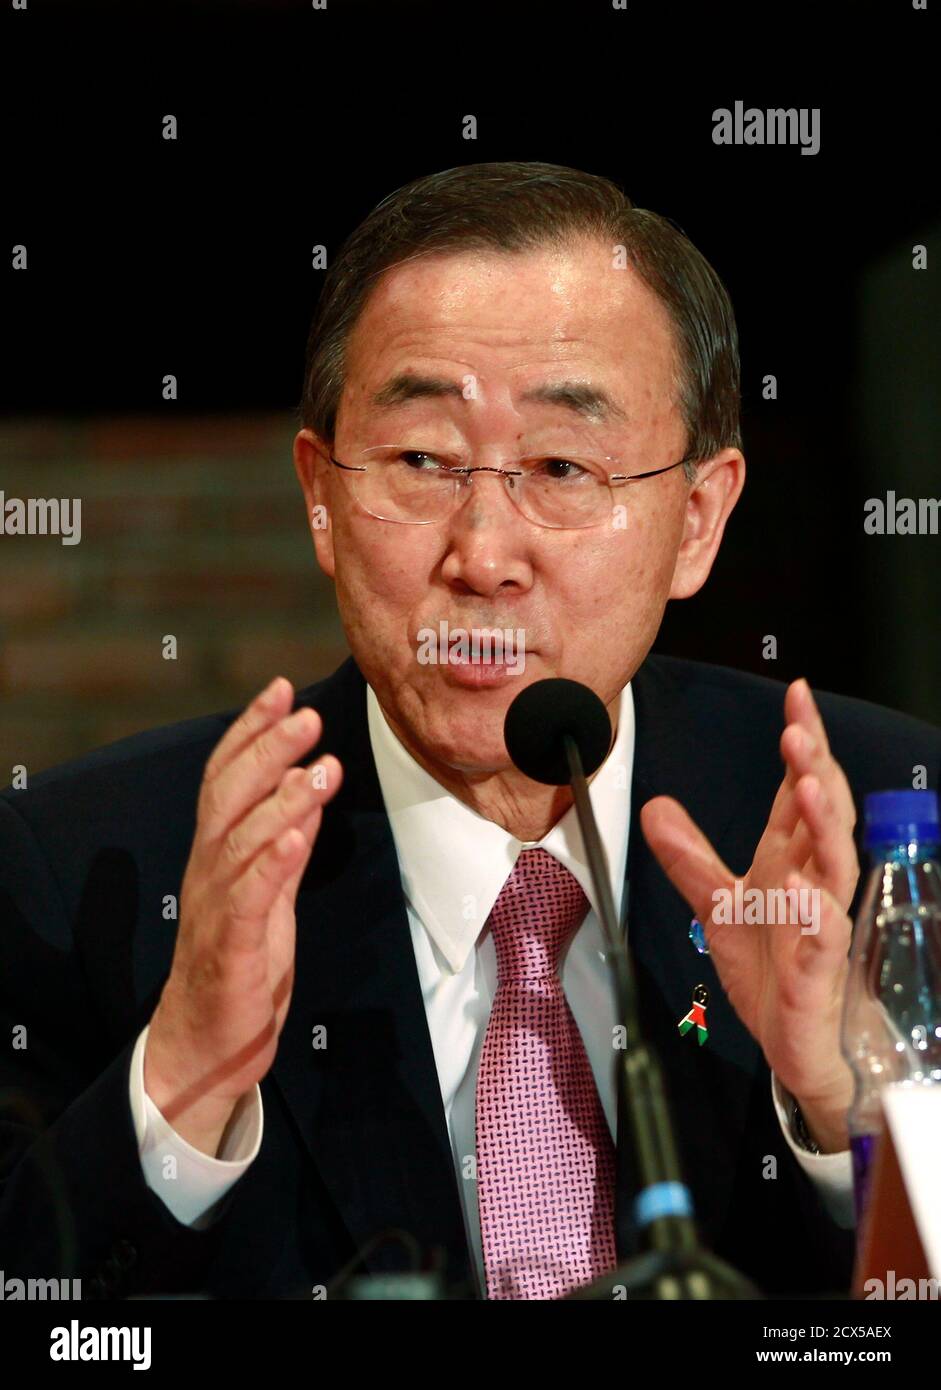 U.N. Secretary General Ban Ki-moon addresses a news conference in Kenya's capital Nairobi, March 31, 2011, after outlining new recommendations to reach the 2015 goals for the AIDS epidemic response. Discrimination, stigma and gender inequality are threatening to undermine progress in the fight against HIV/AIDS, 30 years after the deadly virus took its first toll, the U.N. chief said on Thursday. REUTERS/Thomas Mukoya (KENYA - Tags: POLITICS HEALTH) Stock Photo